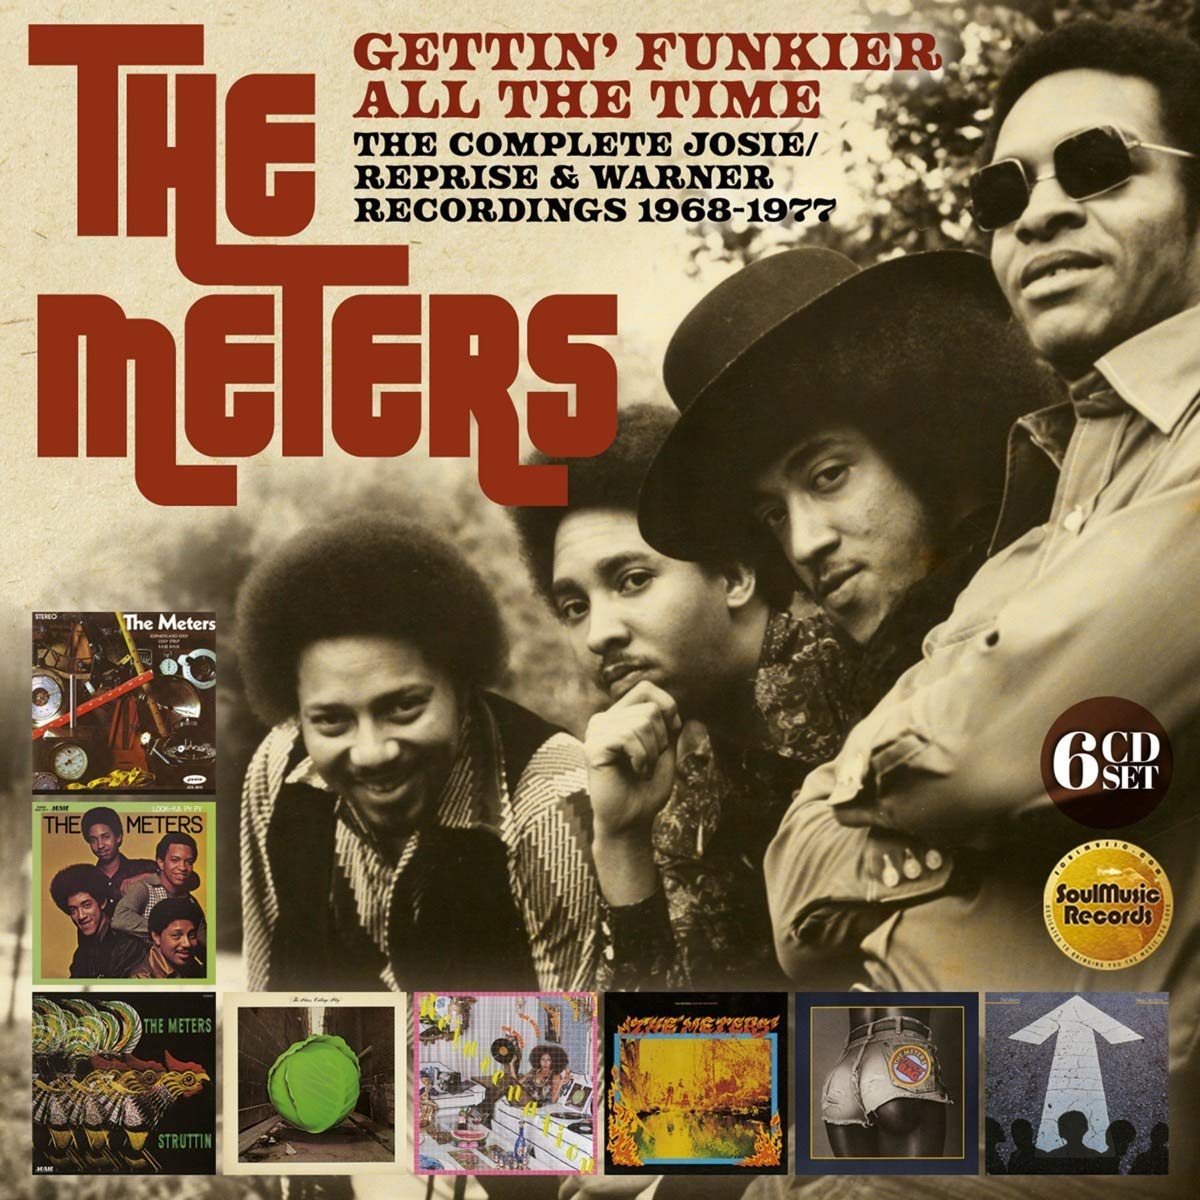 The Meters - Gettin' Funkier All The Time - 6CD